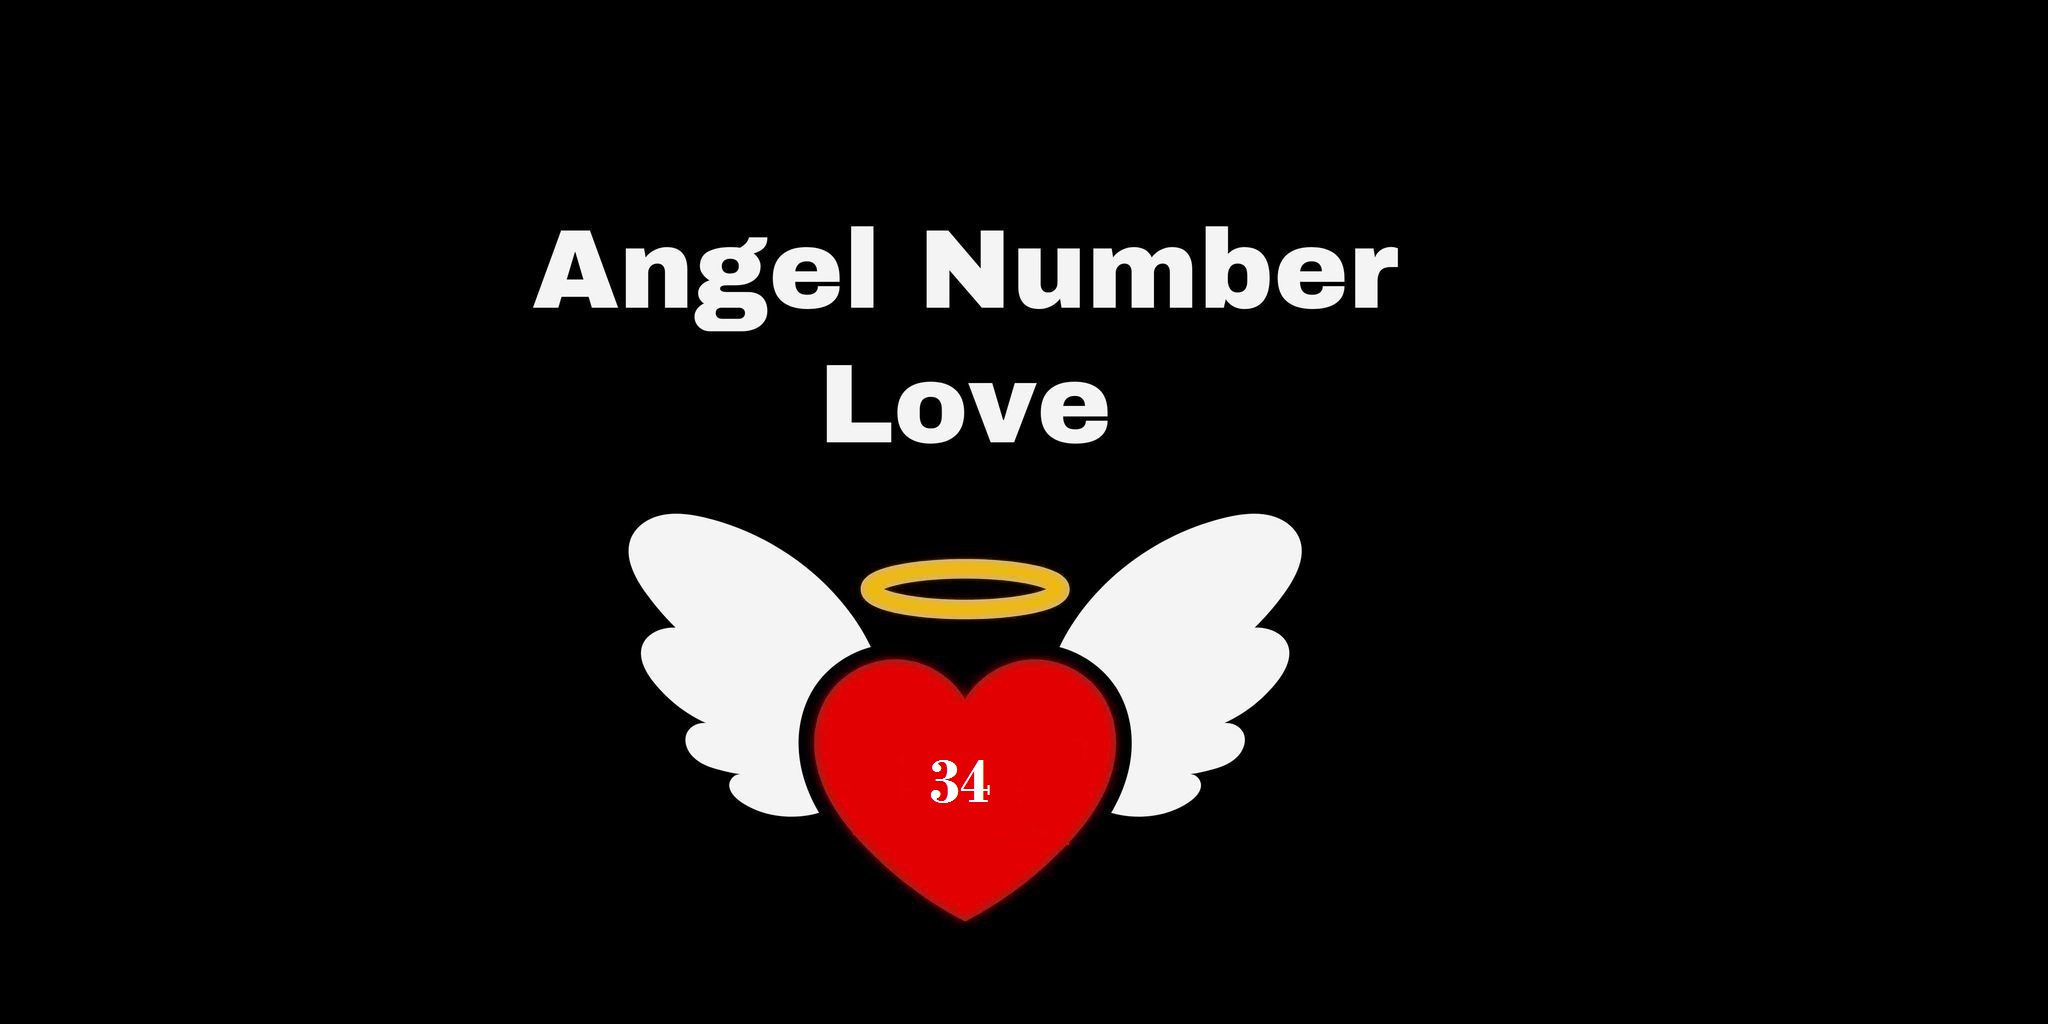 34 Angel Number Meaning In Love